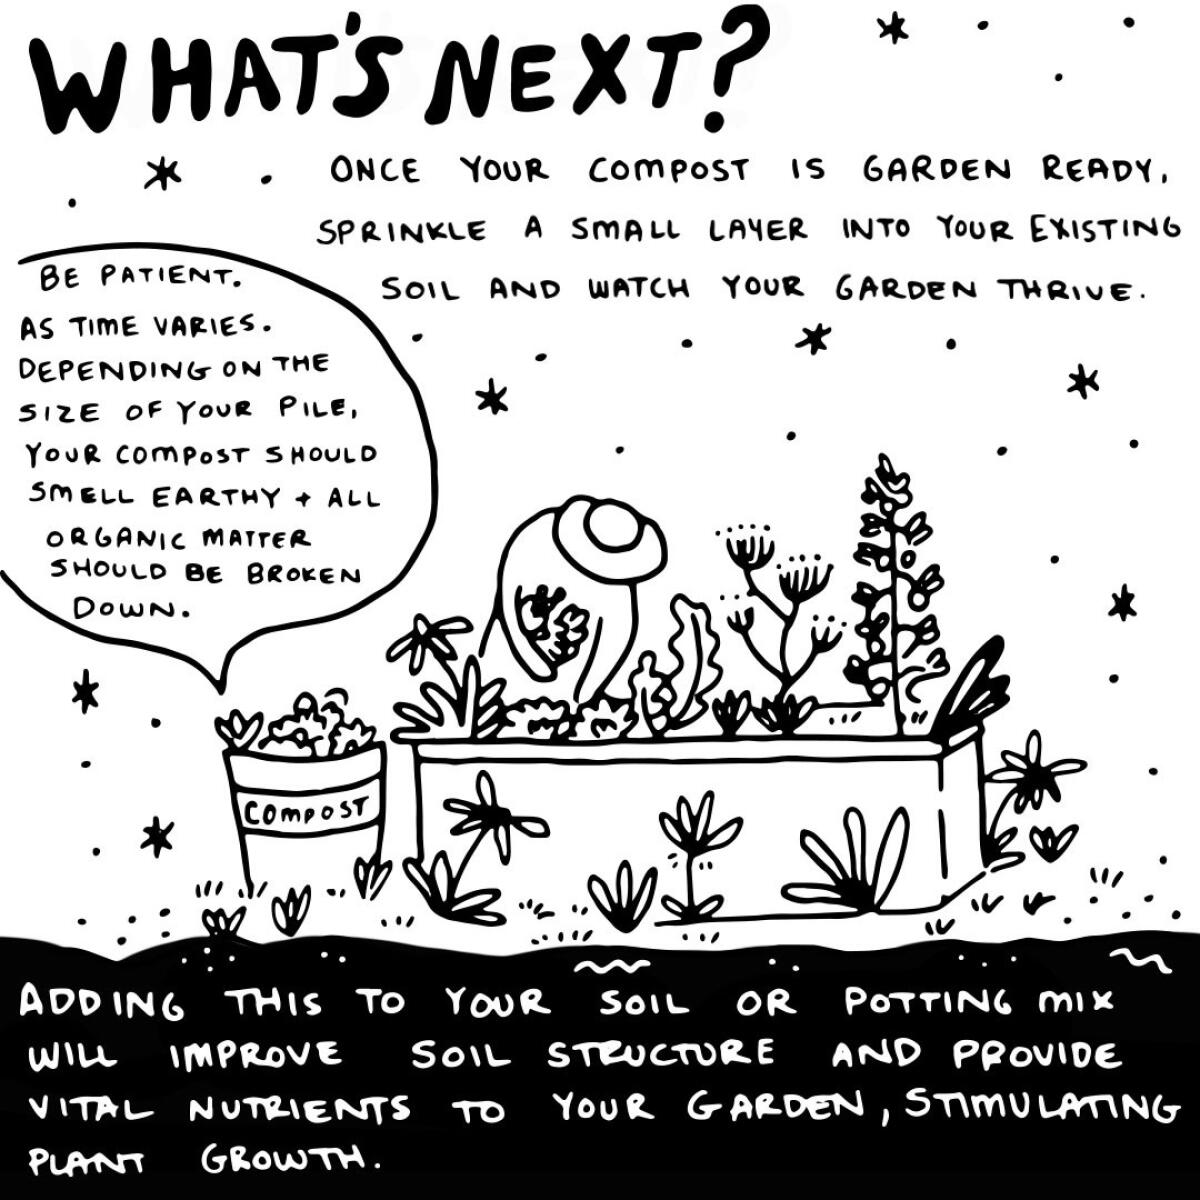 "What's next? Once your compost is garden ready, sprinkle a small layer into your existing soil"